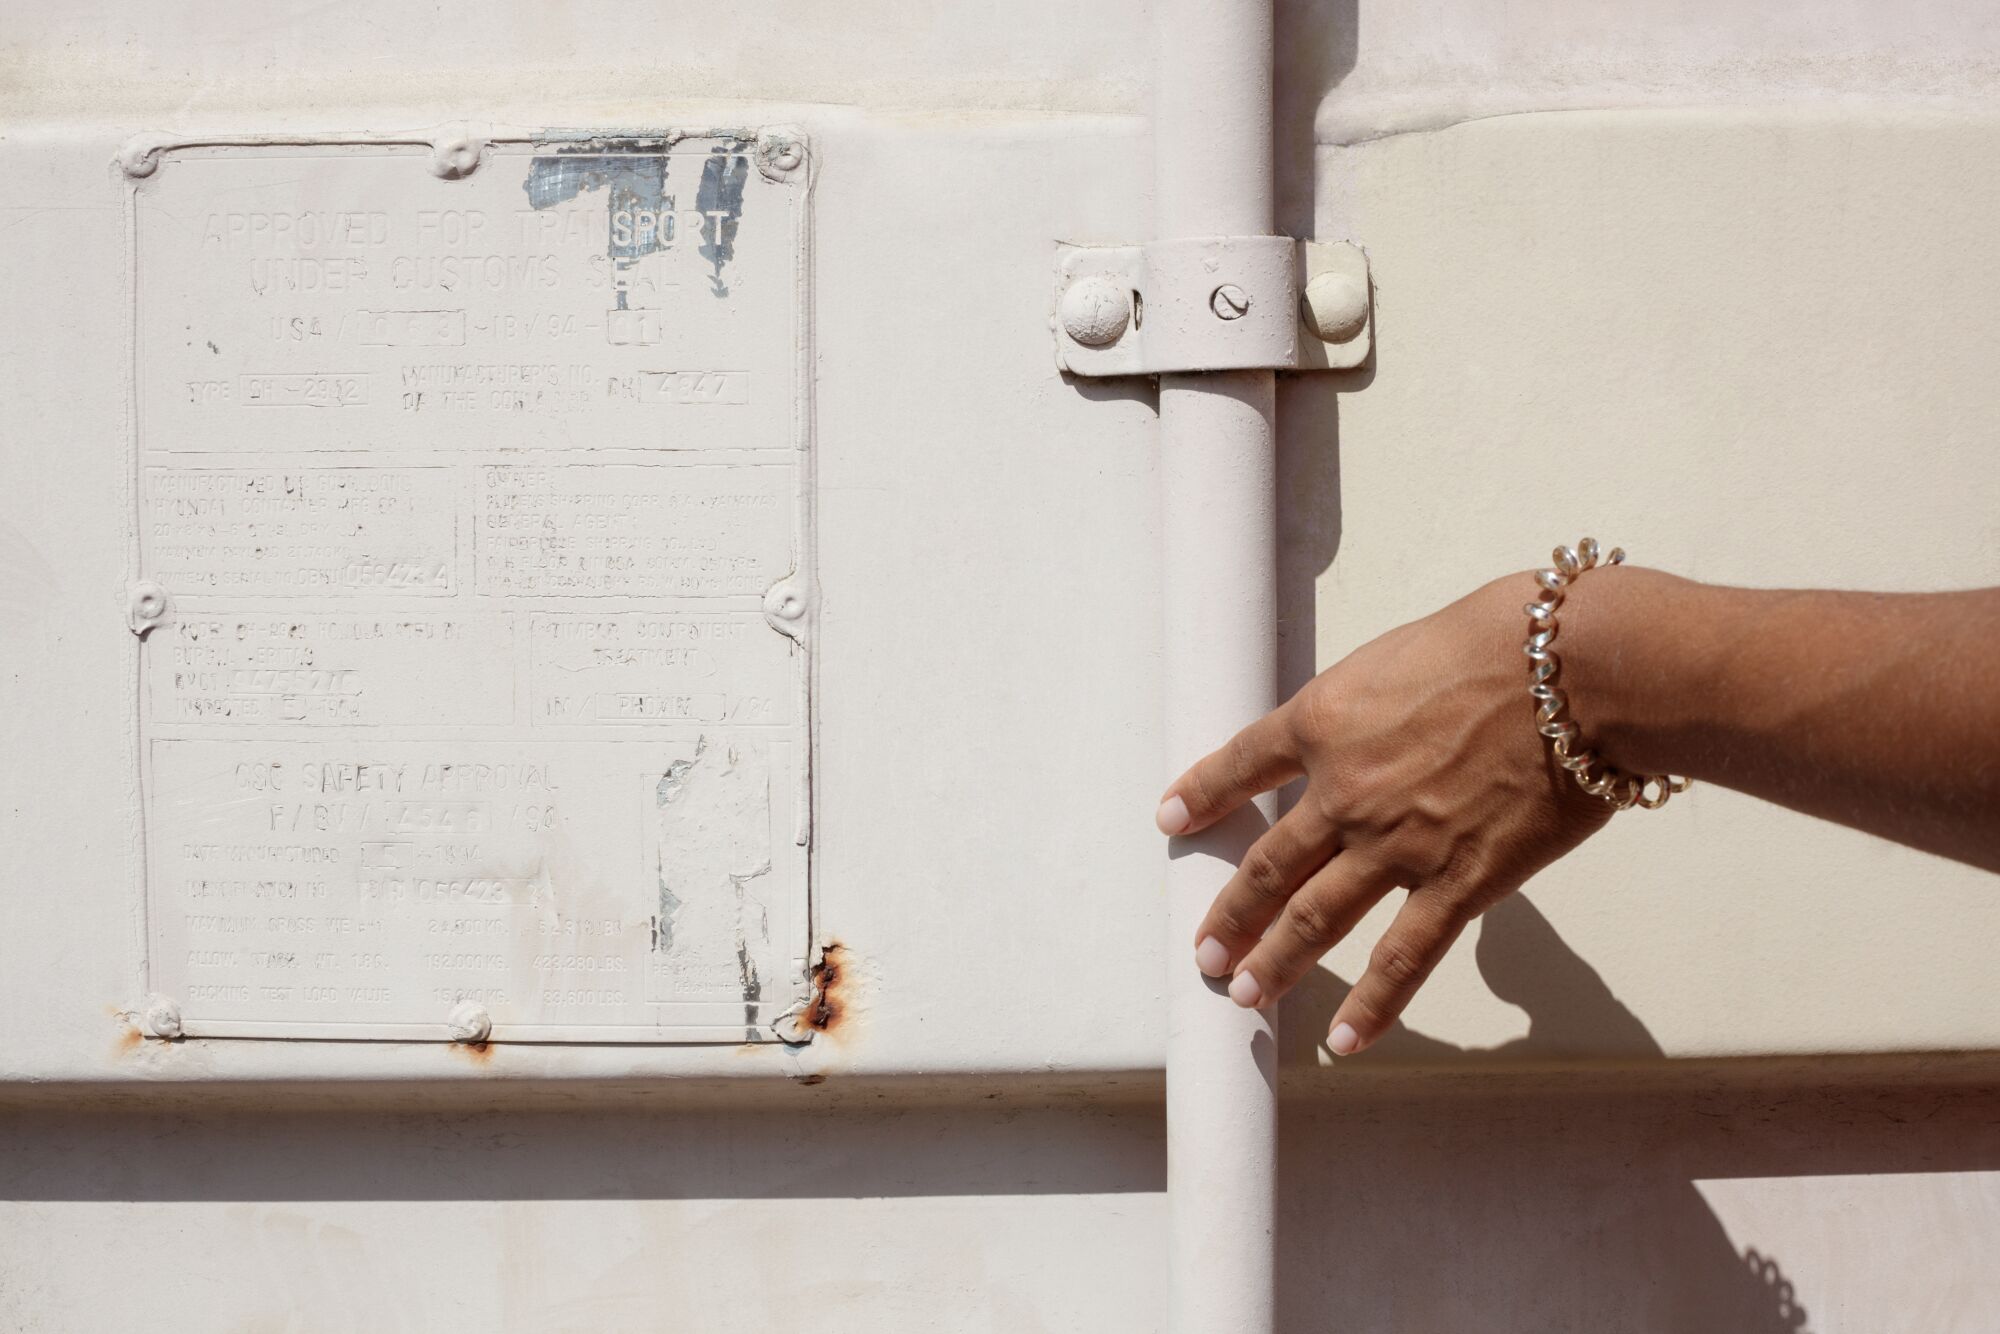 A close-up of Lacey Lennon's hand touching the door of a storage box.